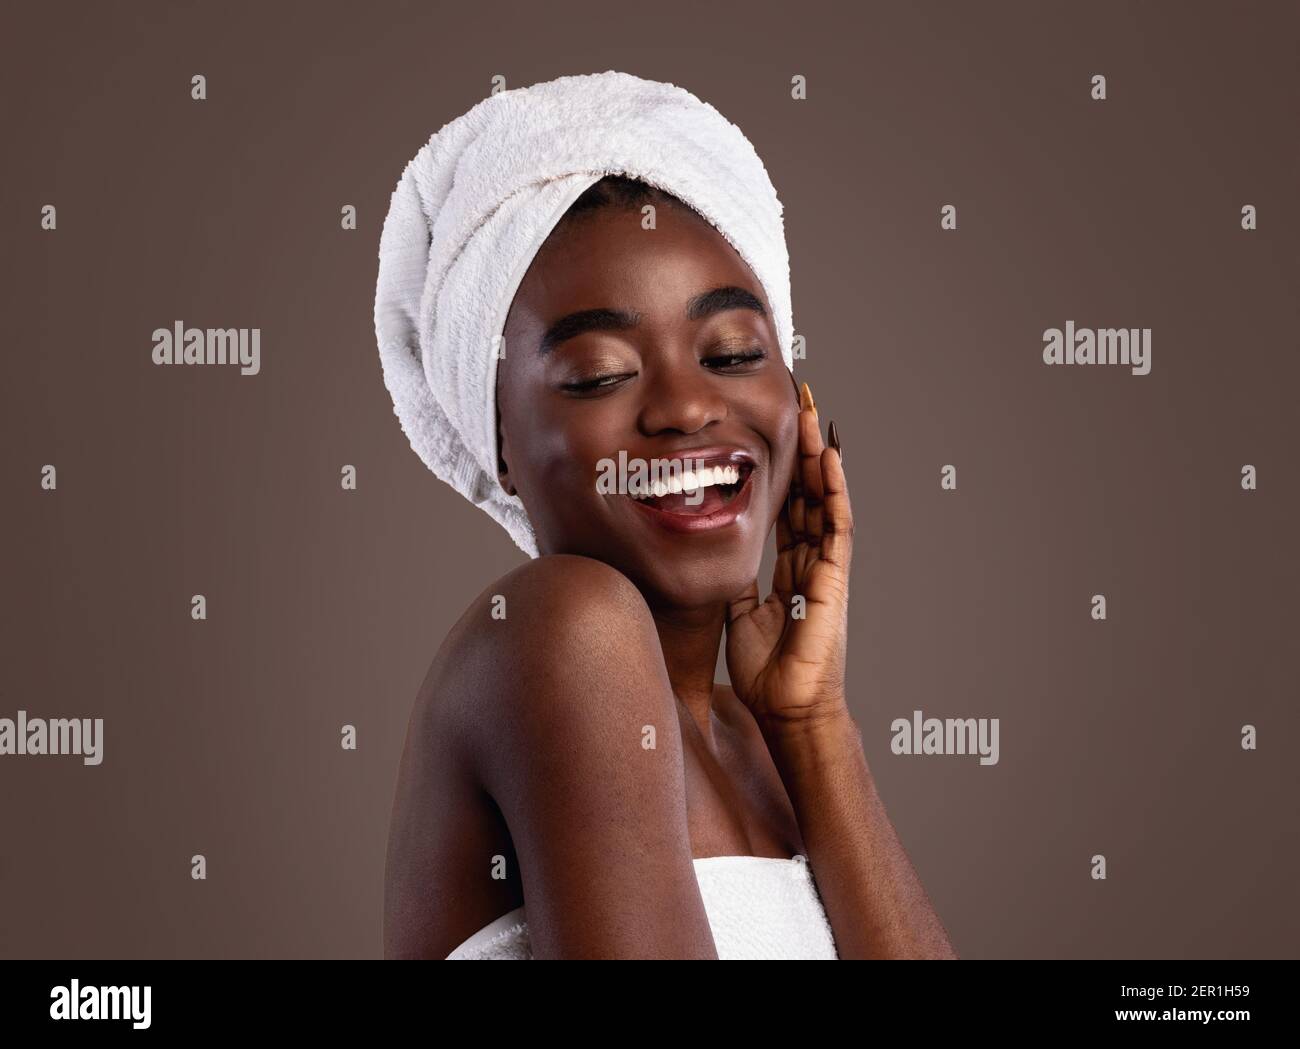 https://c8.alamy.com/comp/2ER1H59/portrait-of-african-woman-with-head-towel-touching-face-2ER1H59.jpg